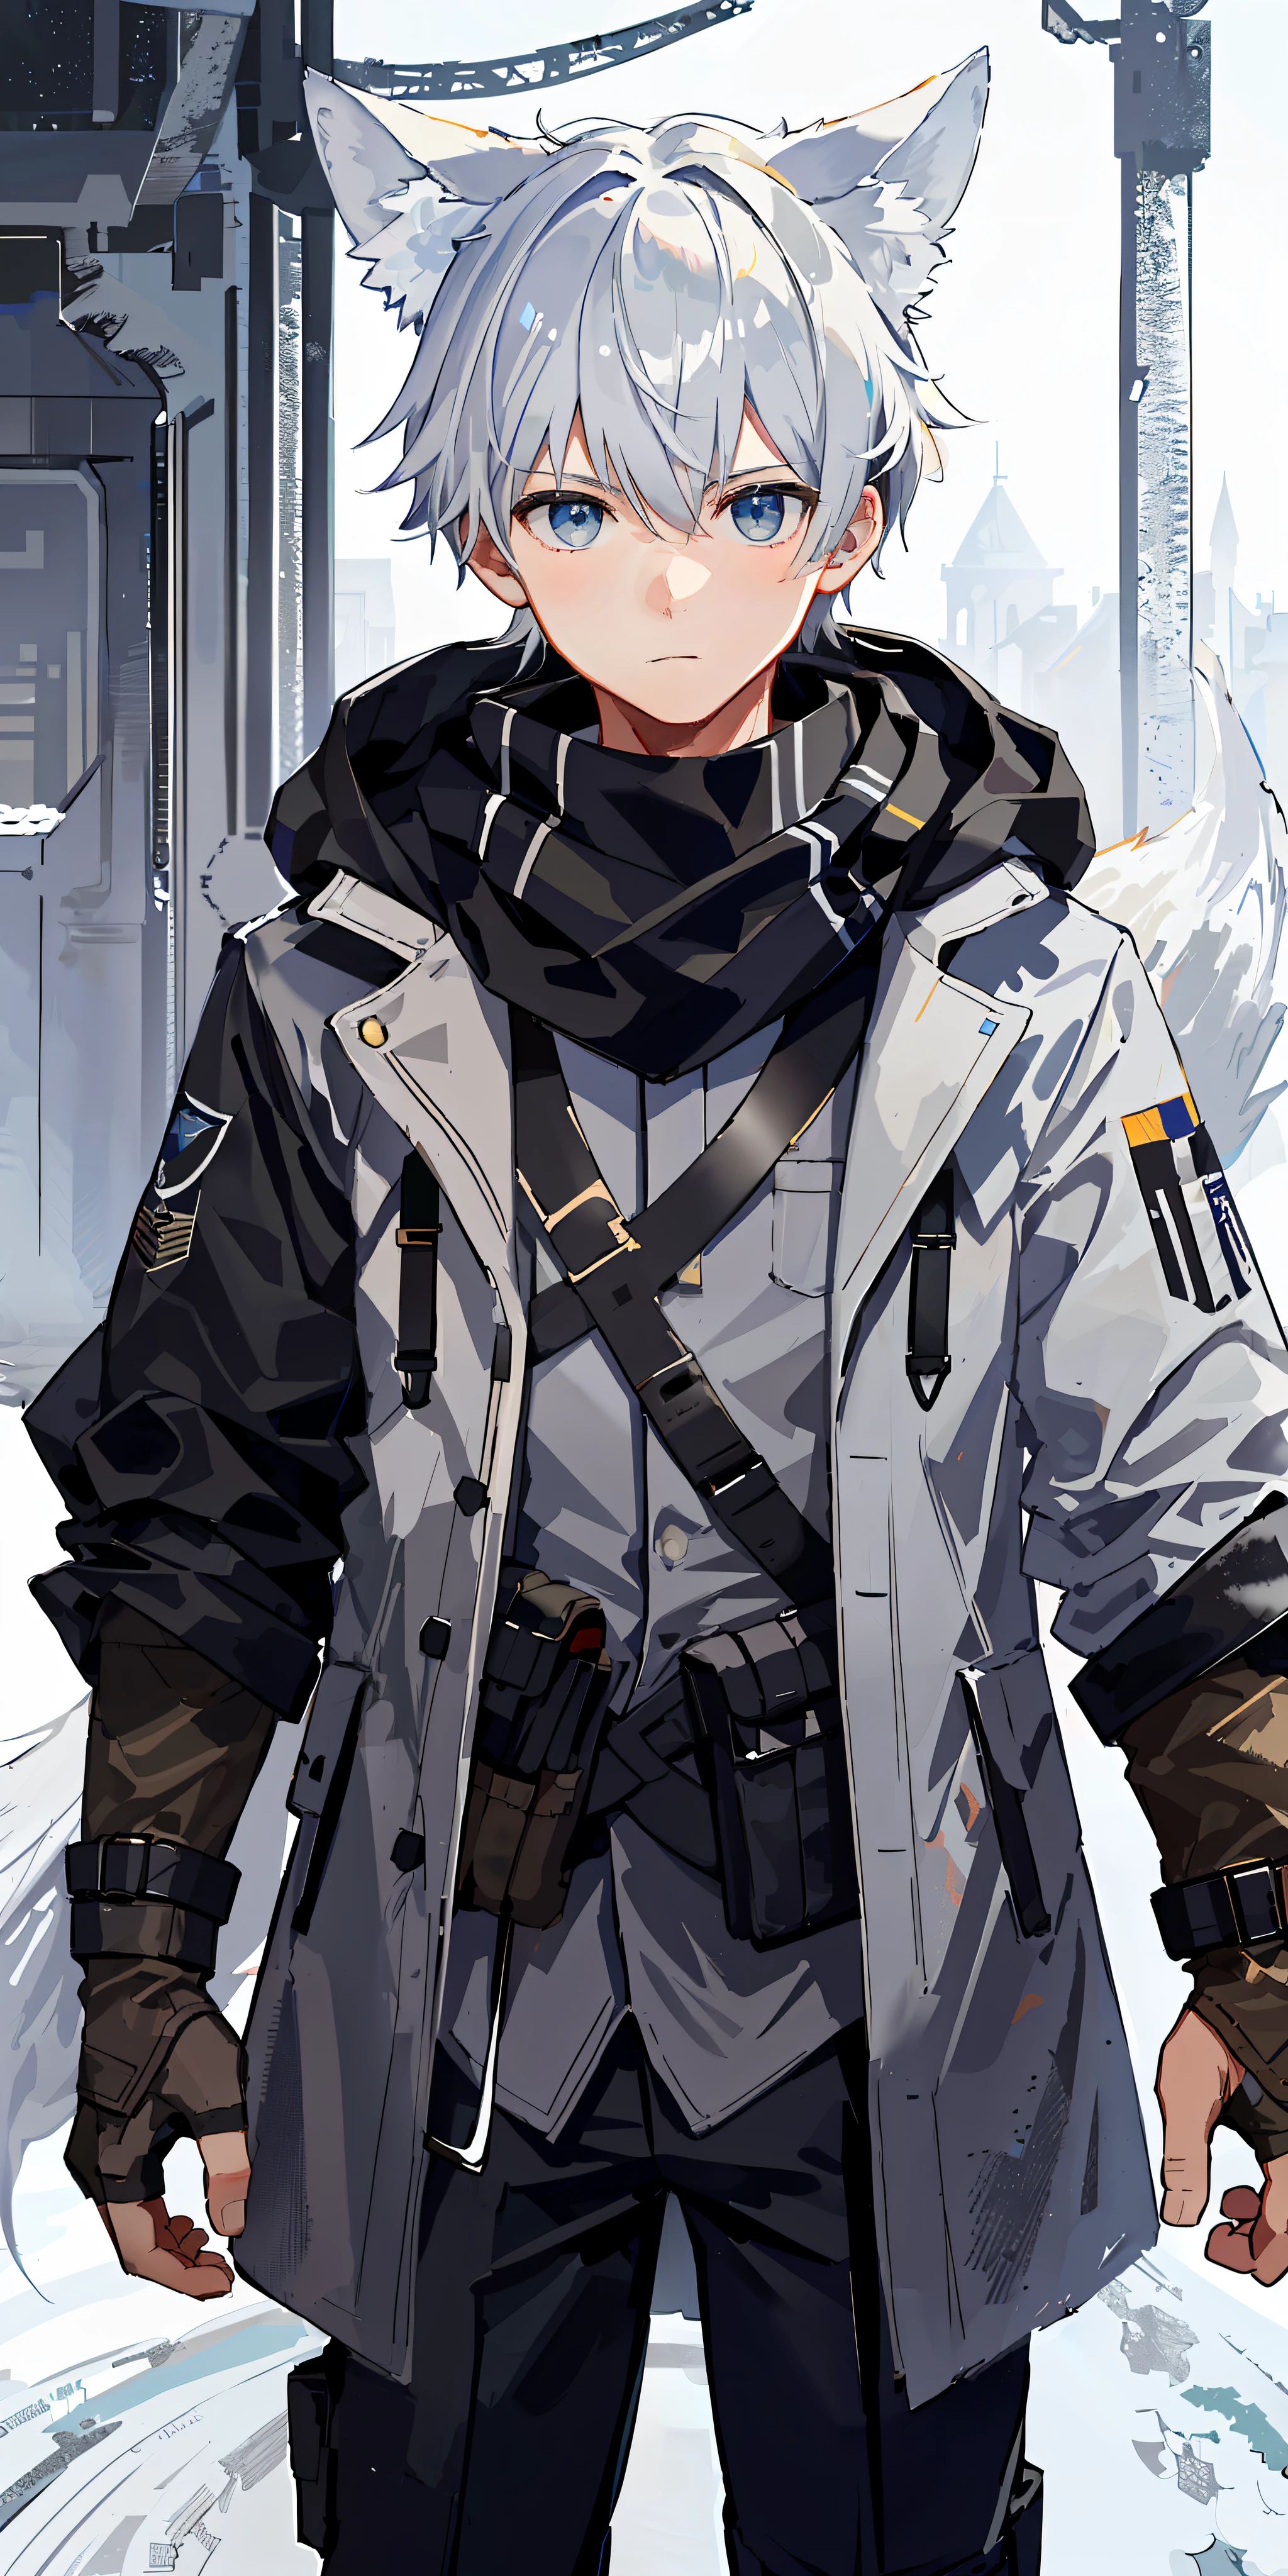 1boy, shota, (HD quality, masterpiece level), fresh and cold teenage characters, wolf ears and wolf tail highlight the character's sense of belonging, blue eyes and dark gray hair echo each other, the clean lines of the white-gray military trench coat show the character's modesty and confidence, brown scarf and black boots are rigid and soft, as if ready to go. The whole picture is simple and atmospheric, and the high and cold temperament is respectful. No background, white screen, slightly fit, HD, masterpiece, white background, dark gray hair, blue eyes, (wolf ears), (wolf tail), slim white gray military trench coat, no hood, brown scarf, black boots, one tail, little boy